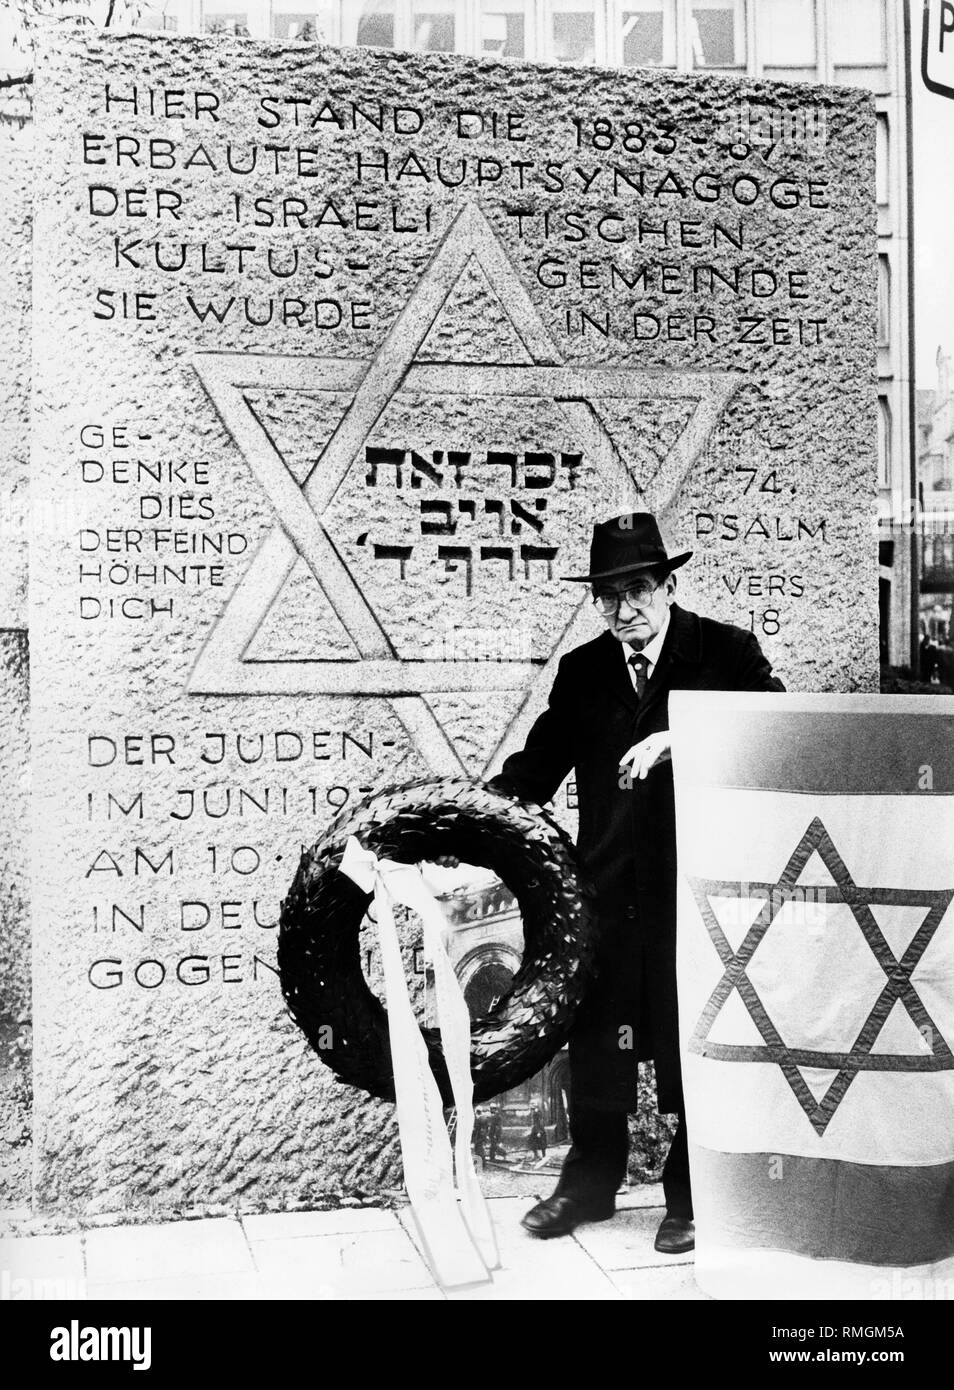 Dr. Hans Lamm of the Jewish Community places a wreath in front of the memorial stone of the former main synagogue in memory of the events on 09.11.1938. Behind the wreath, a picture of the burned-out synagogue. The memorial stone is located at the corner of Herzog-Max-Strasse and Maxburgstrasse. Stock Photo